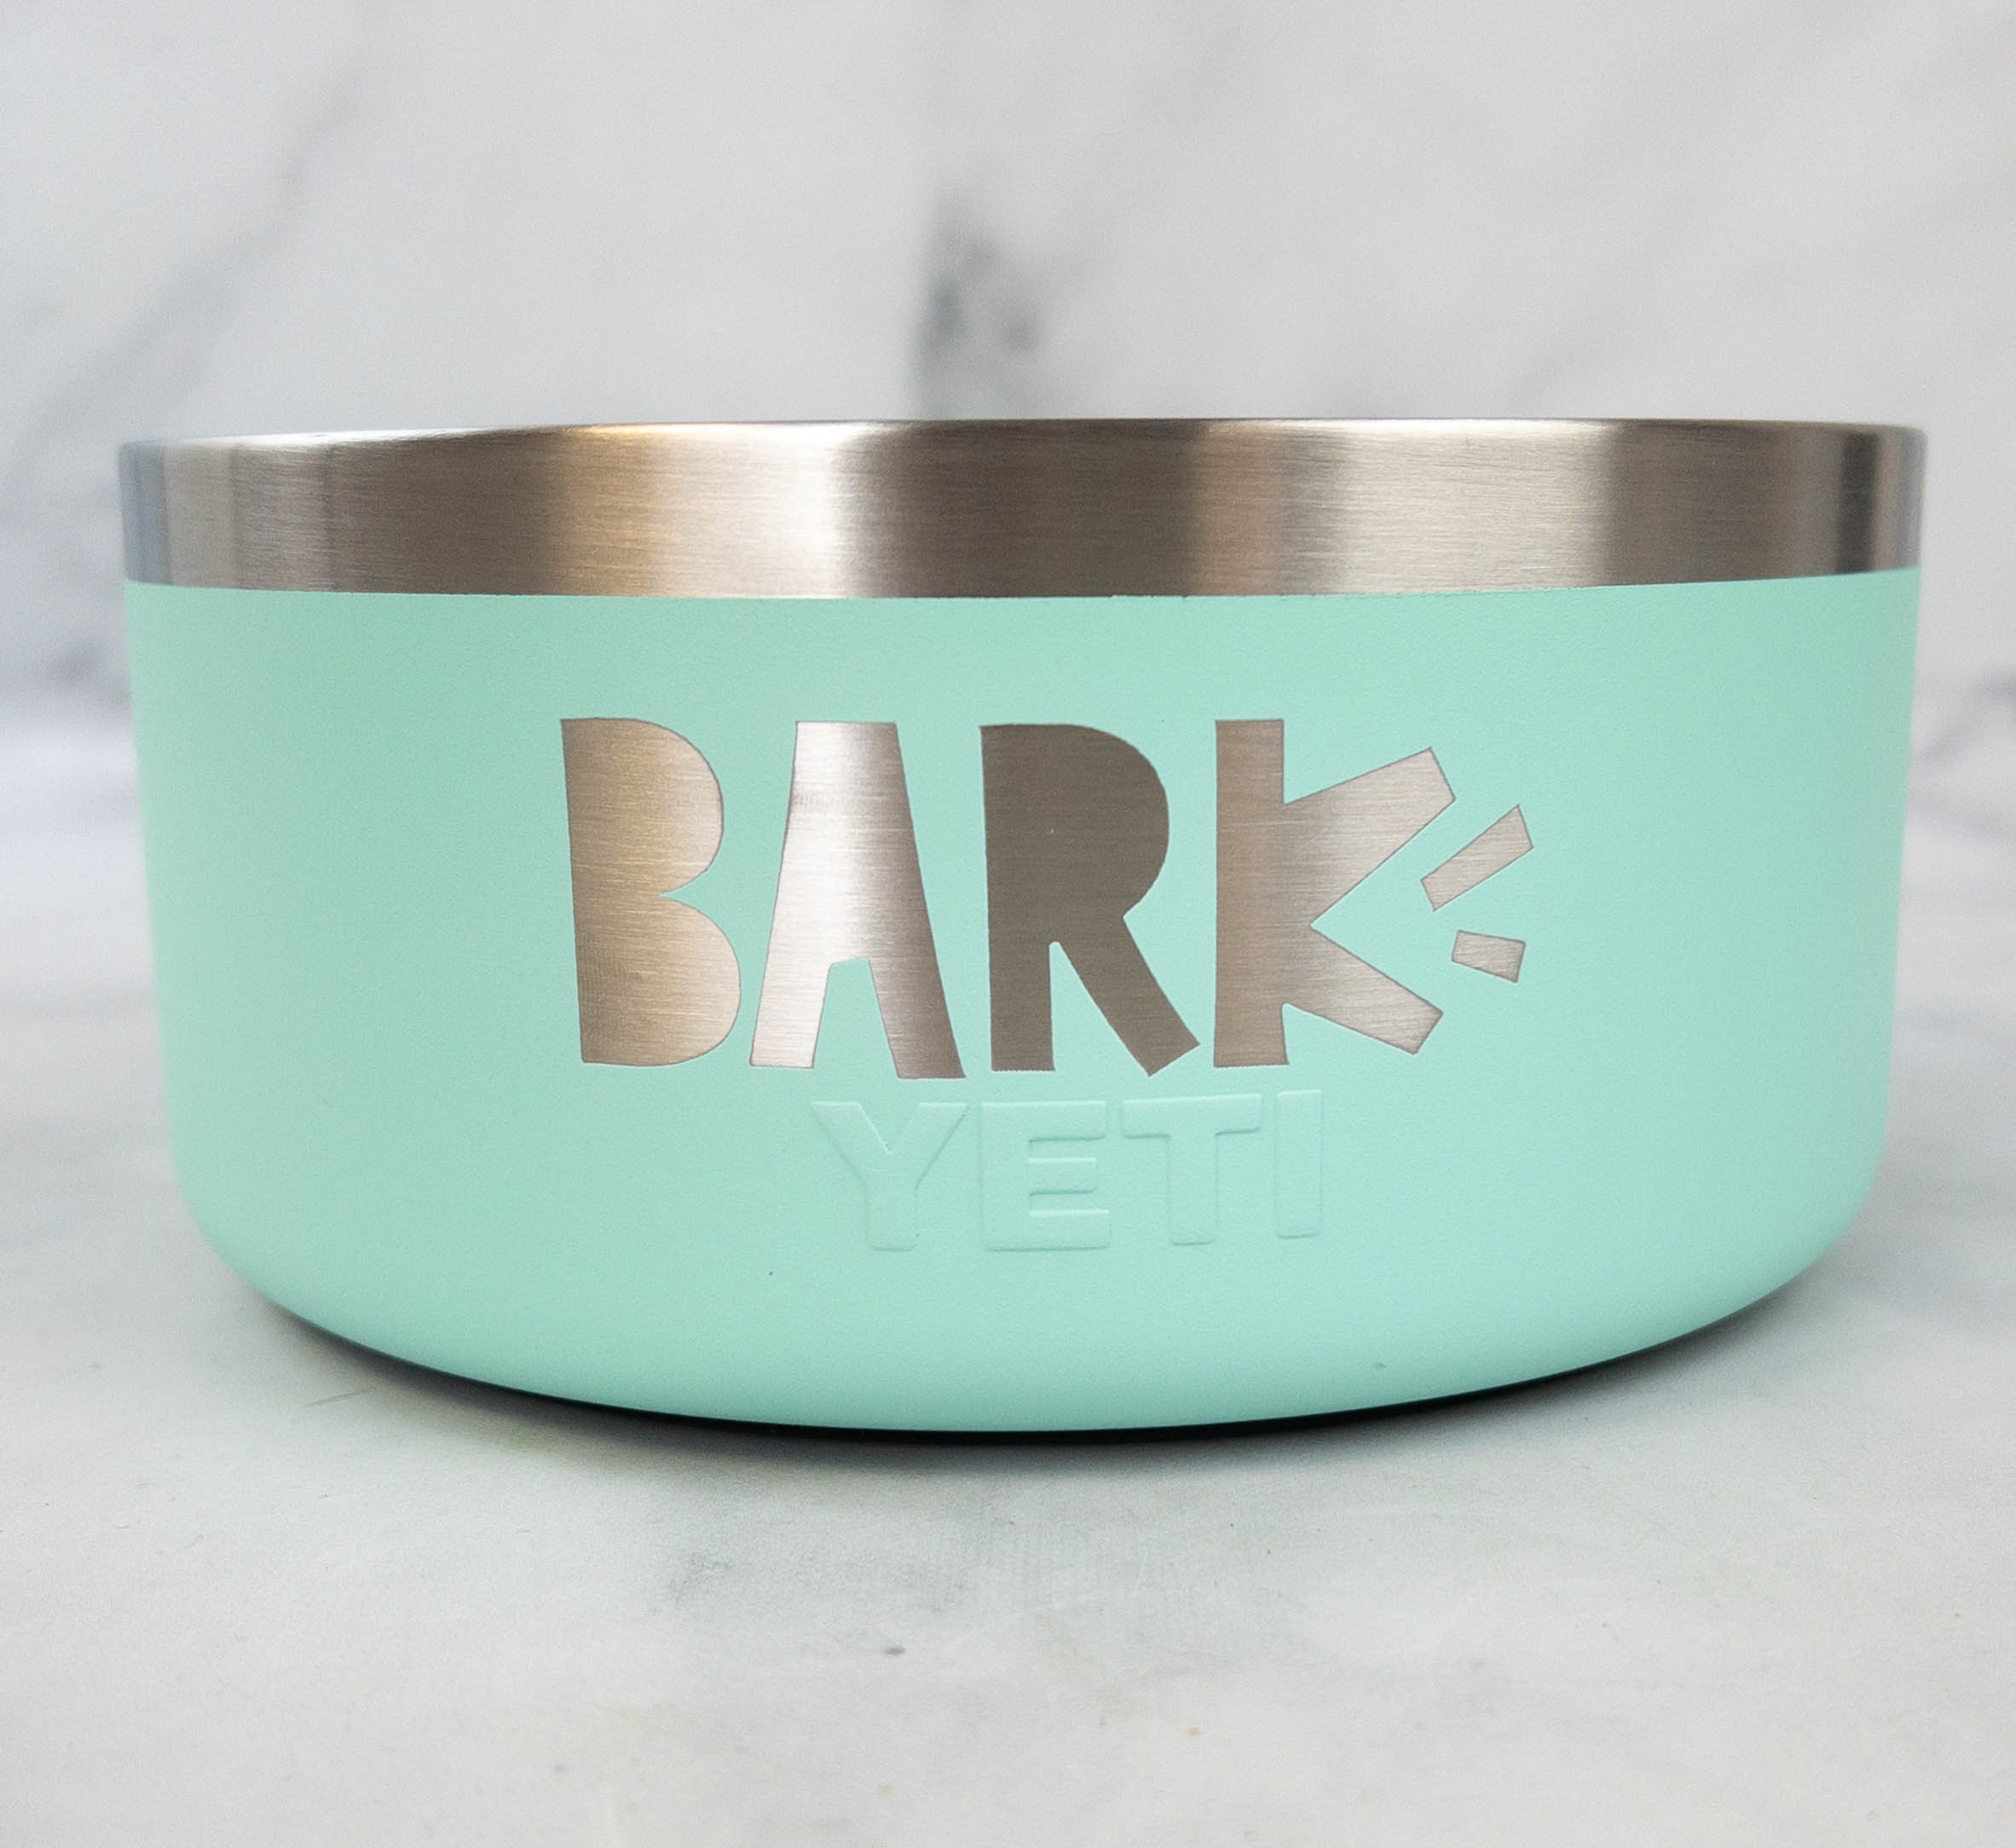 Yeti Dog Bowl Review: Features, Pricing & More (With Personal Experience) -  Canine Journal